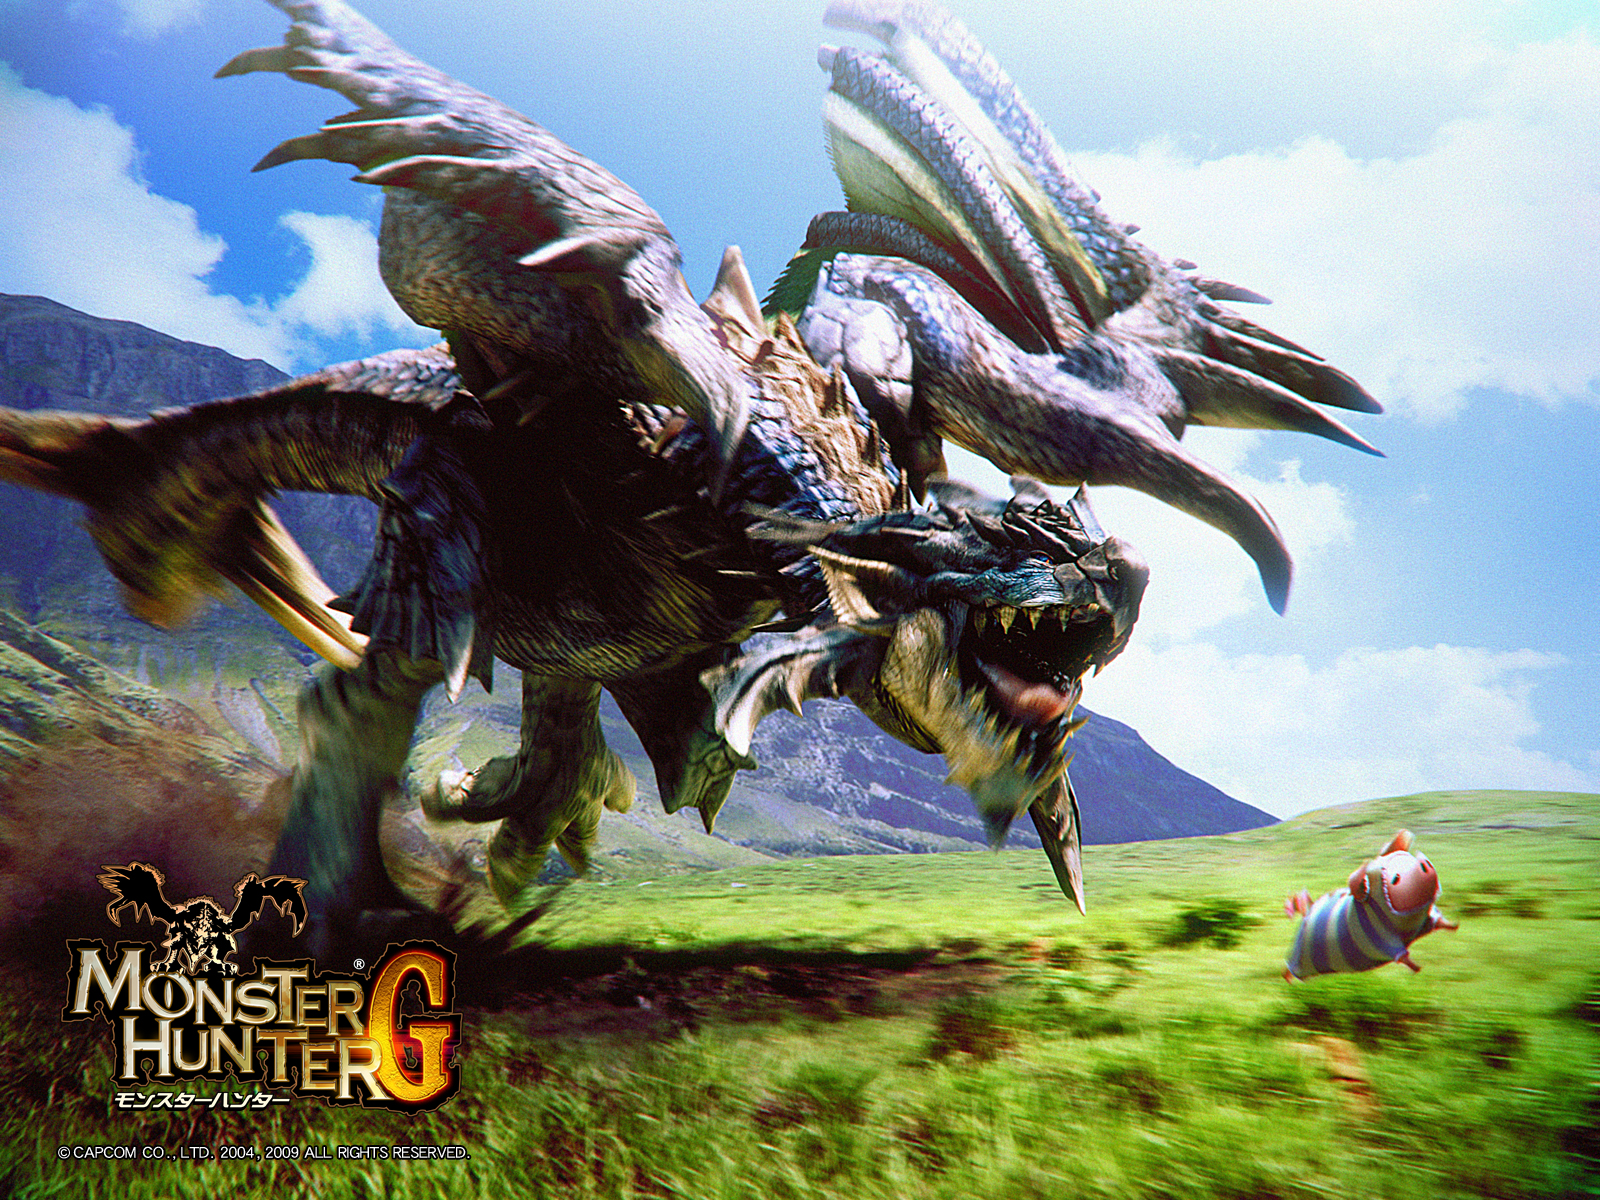 Free Download Monster Hunter Wallpapers First Hd Wallpapers 1600x10 For Your Desktop Mobile Tablet Explore 73 Monster Hunter Background Cool Monster Wallpapers Monster Hunter 4 Ultimate Wallpaper Monster Wallpaper For Computer